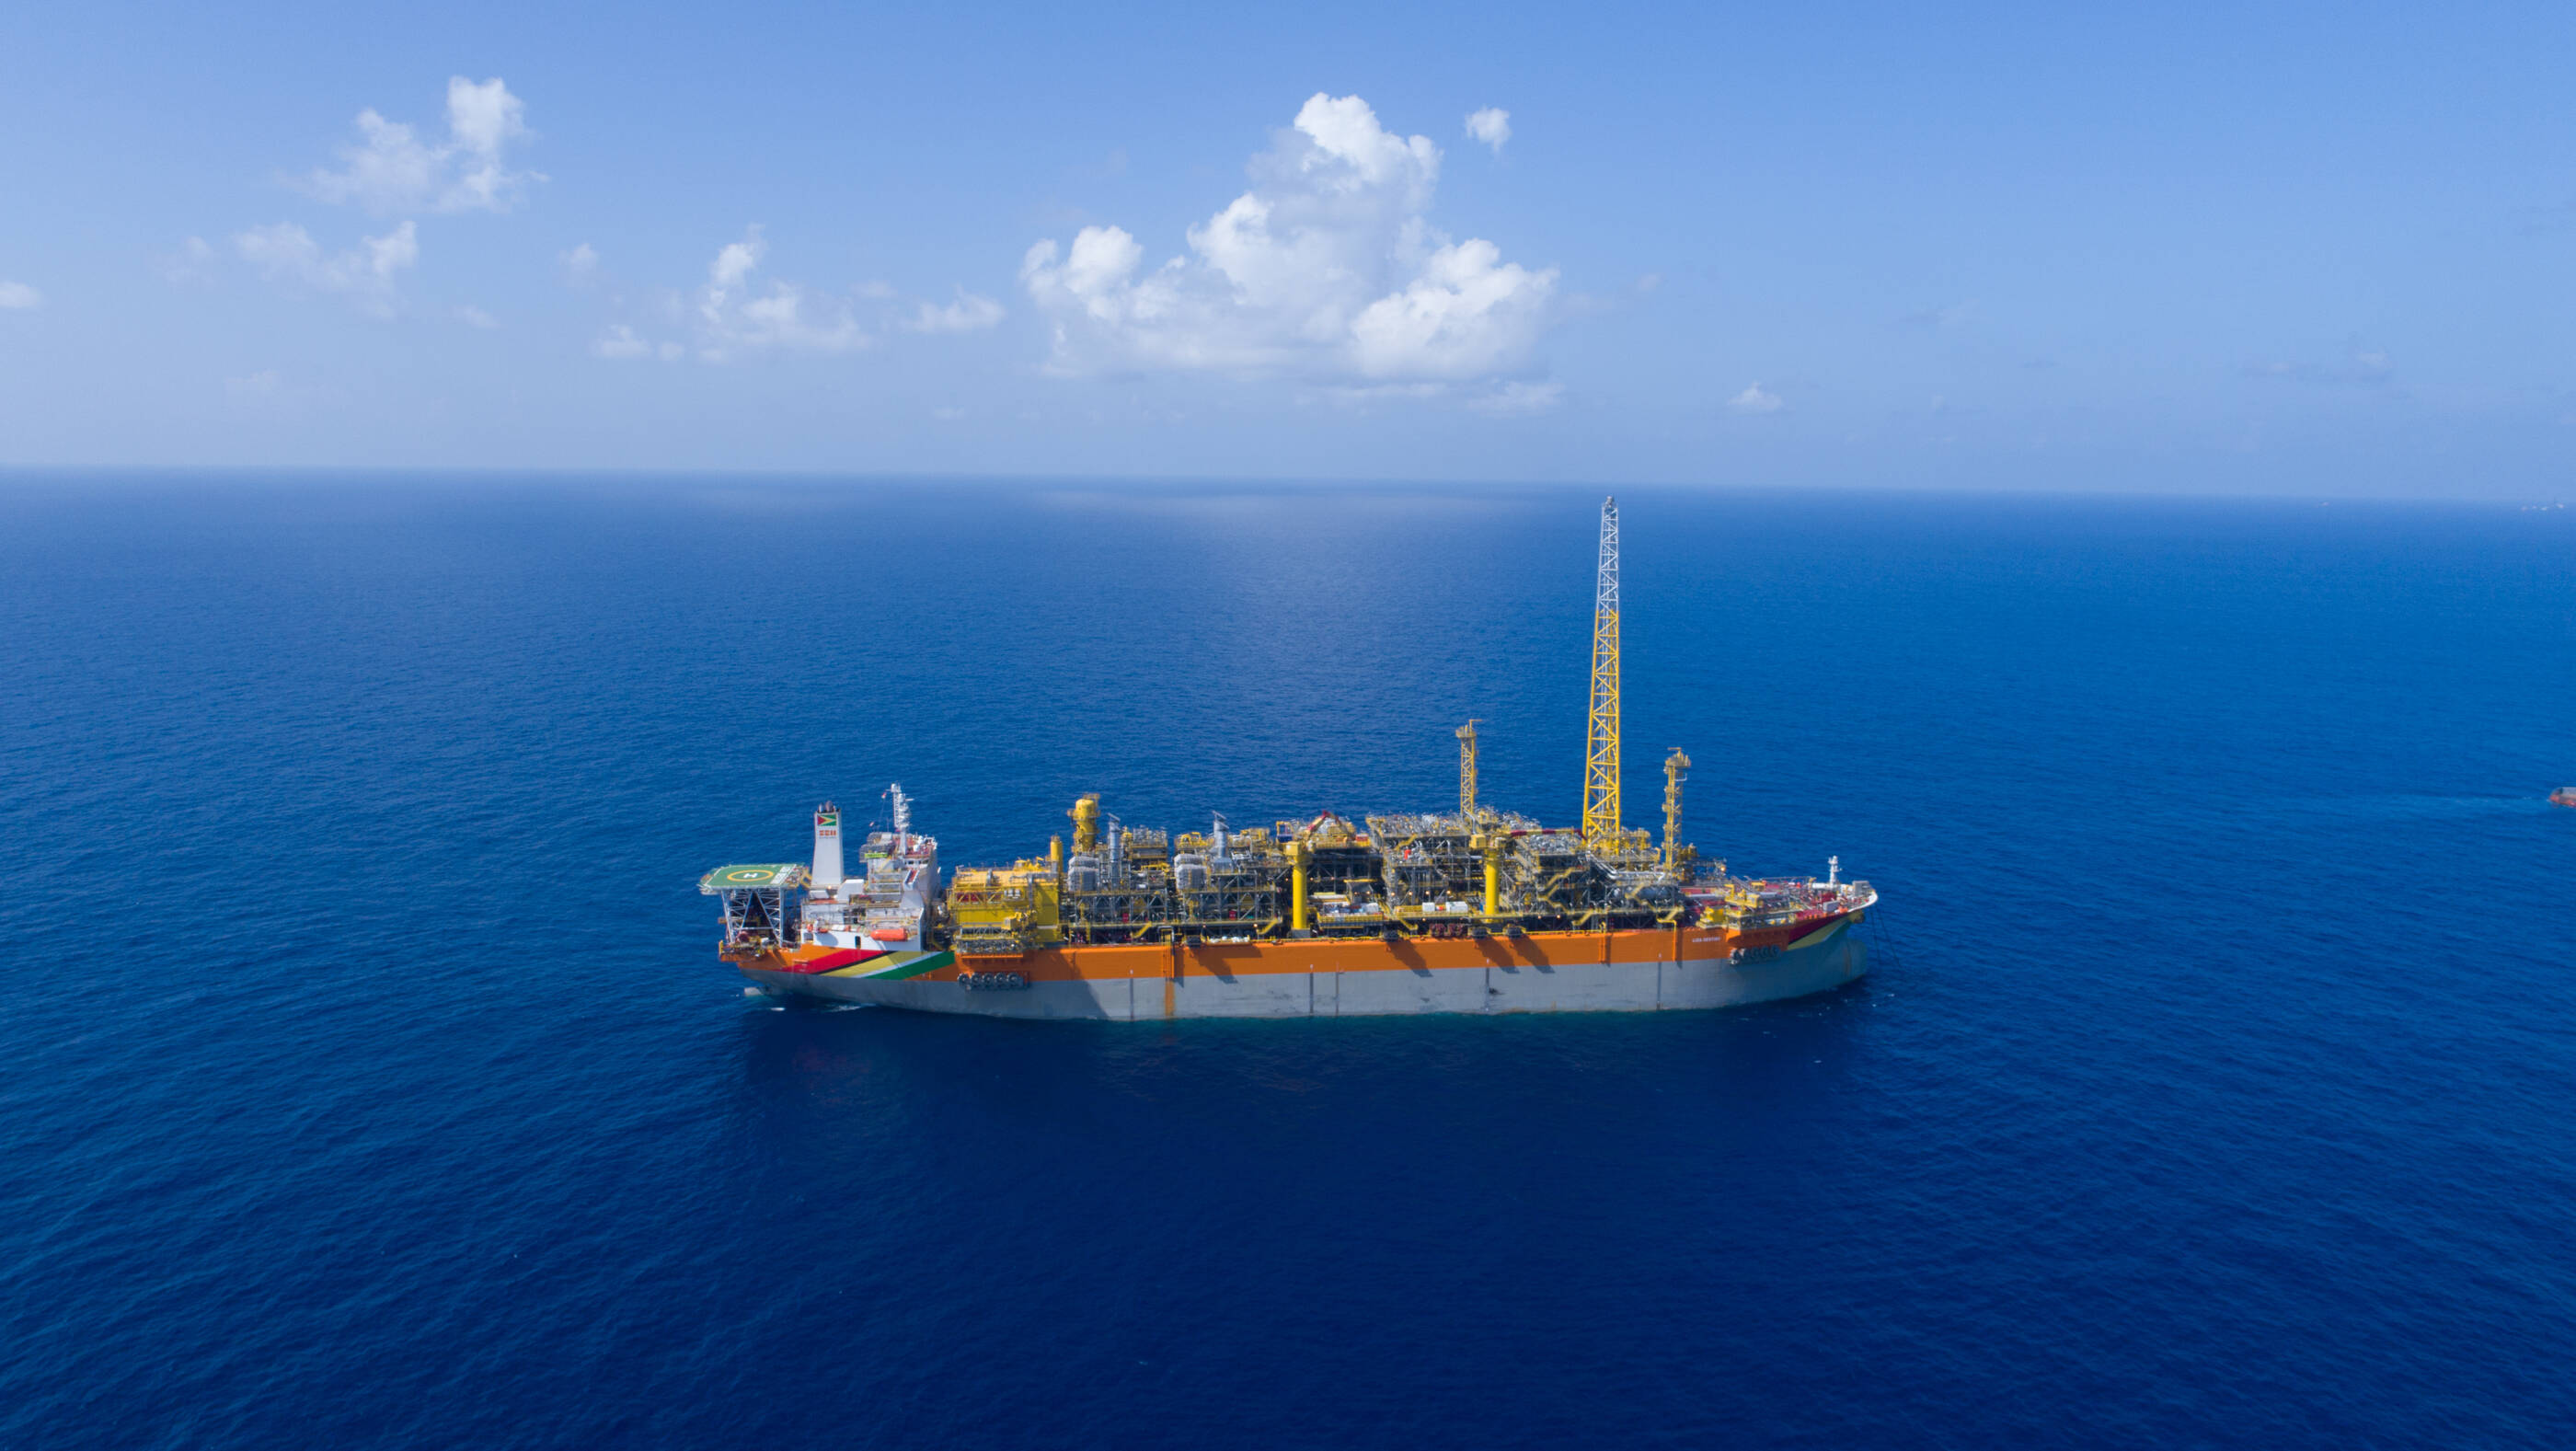 In late 2019, ExxonMobil starts oil production from the Liza field offshore Guyana. This startup comes ahead of schedule and less than five years after the first discovery of hydrocarbons, well ahead of the industry average for deepwater developments.